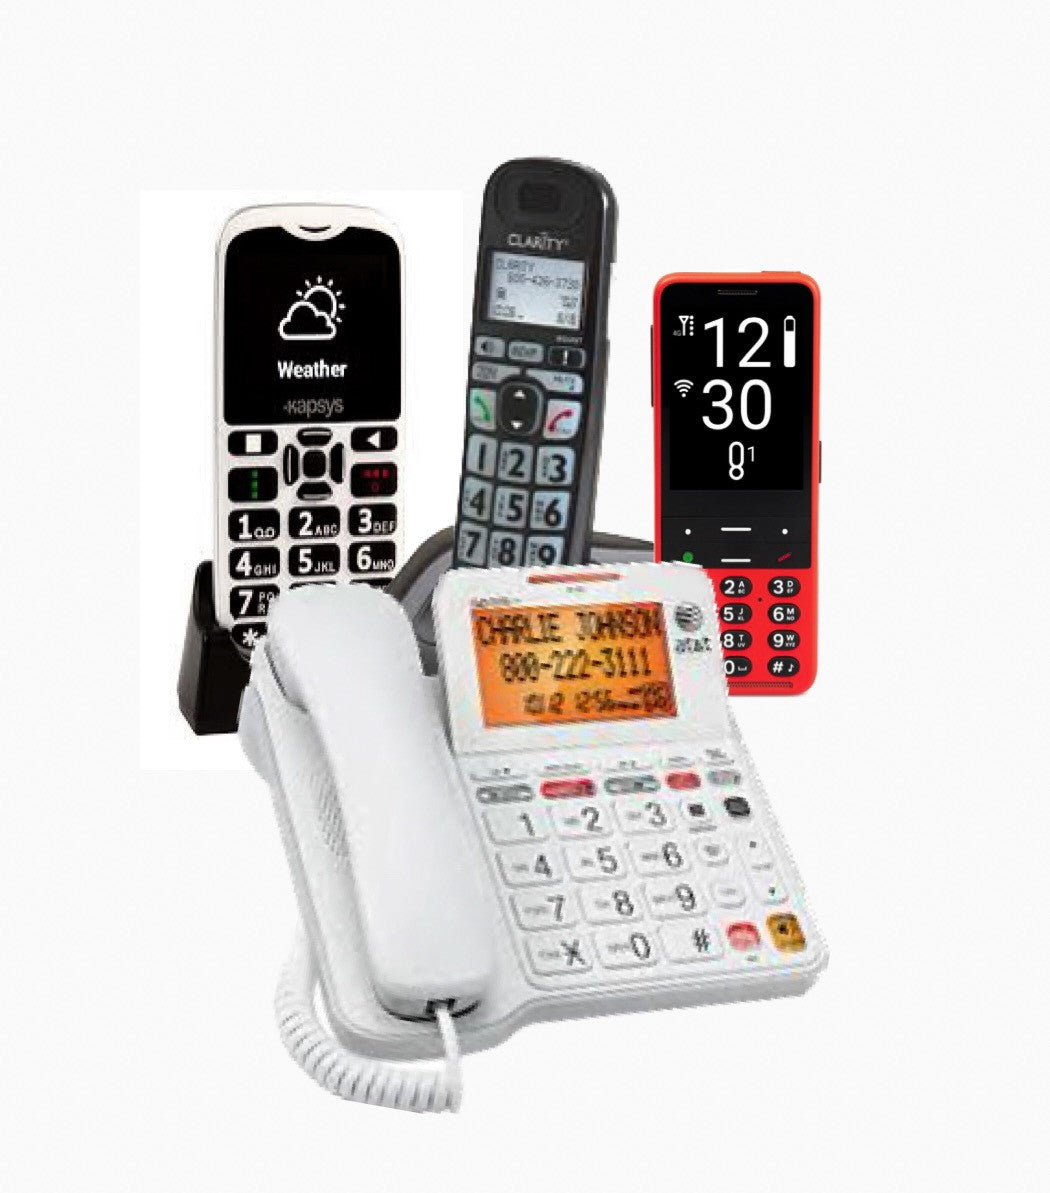 A selection of accessible telephones for those who are low vision or blind.  Large button cell phones, cordless phones, and land line corded phone.